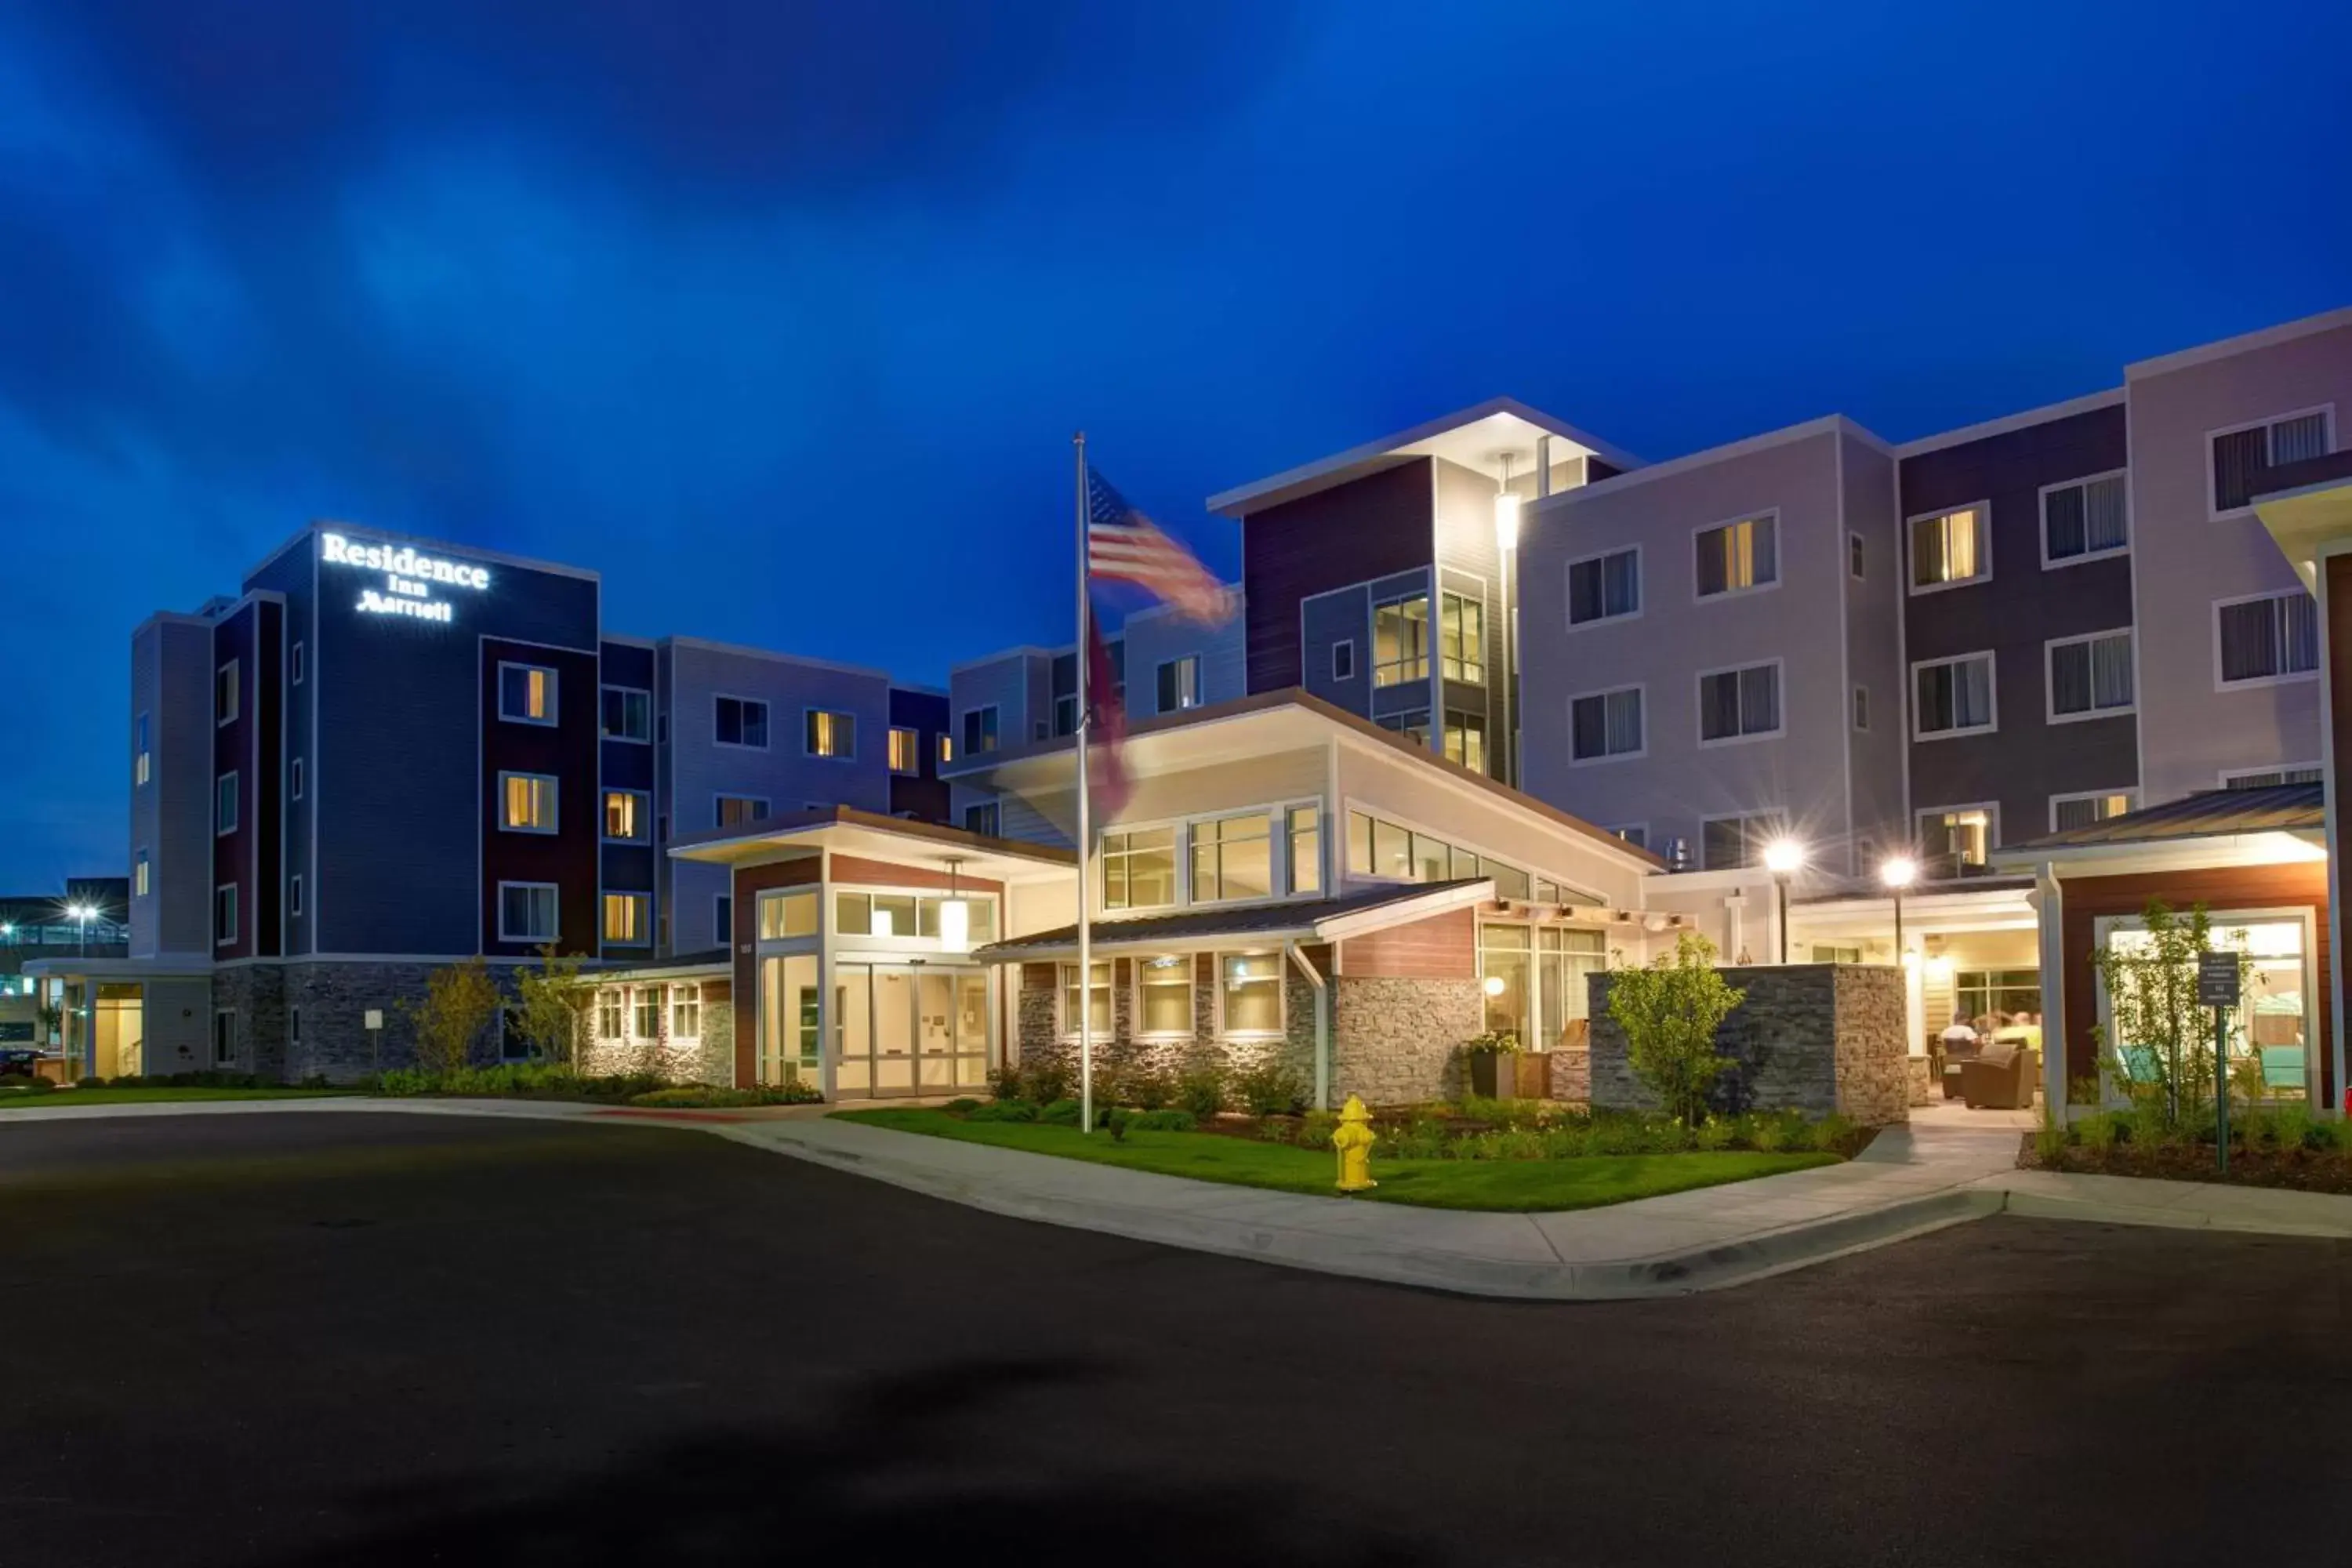 Property Building in Residence Inn by Marriott Chicago Bolingbrook